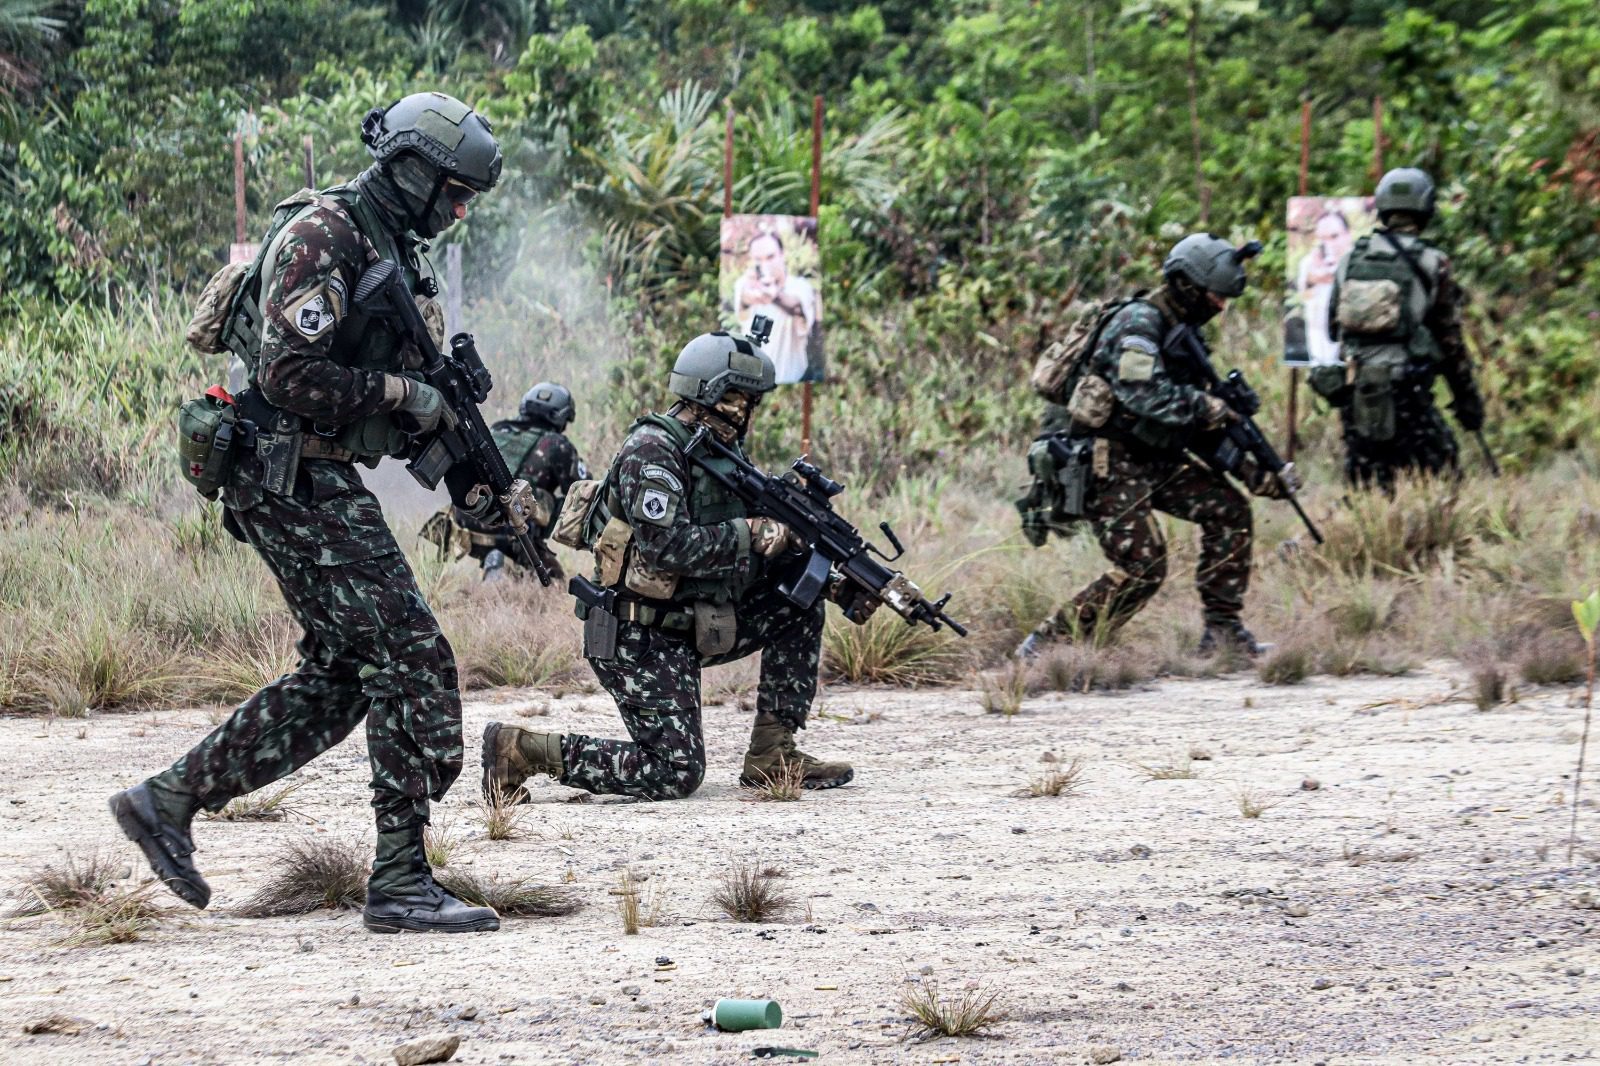 Brazilian and US Special Forces carry out integration activity in the Amazon